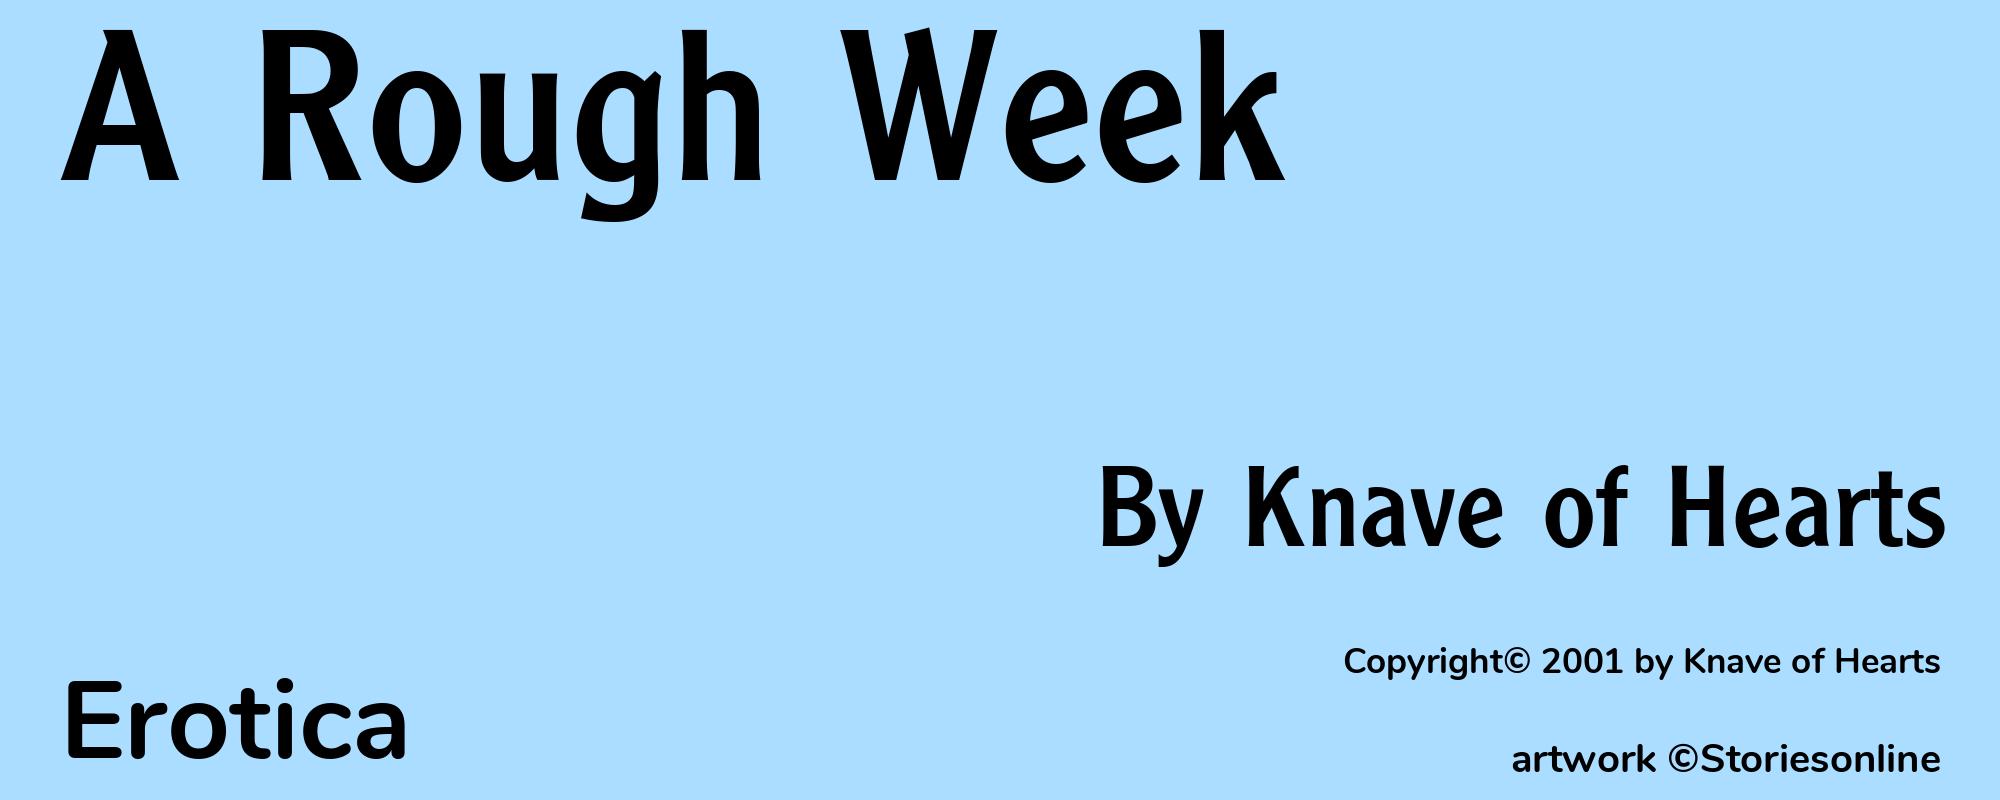 A Rough Week - Cover